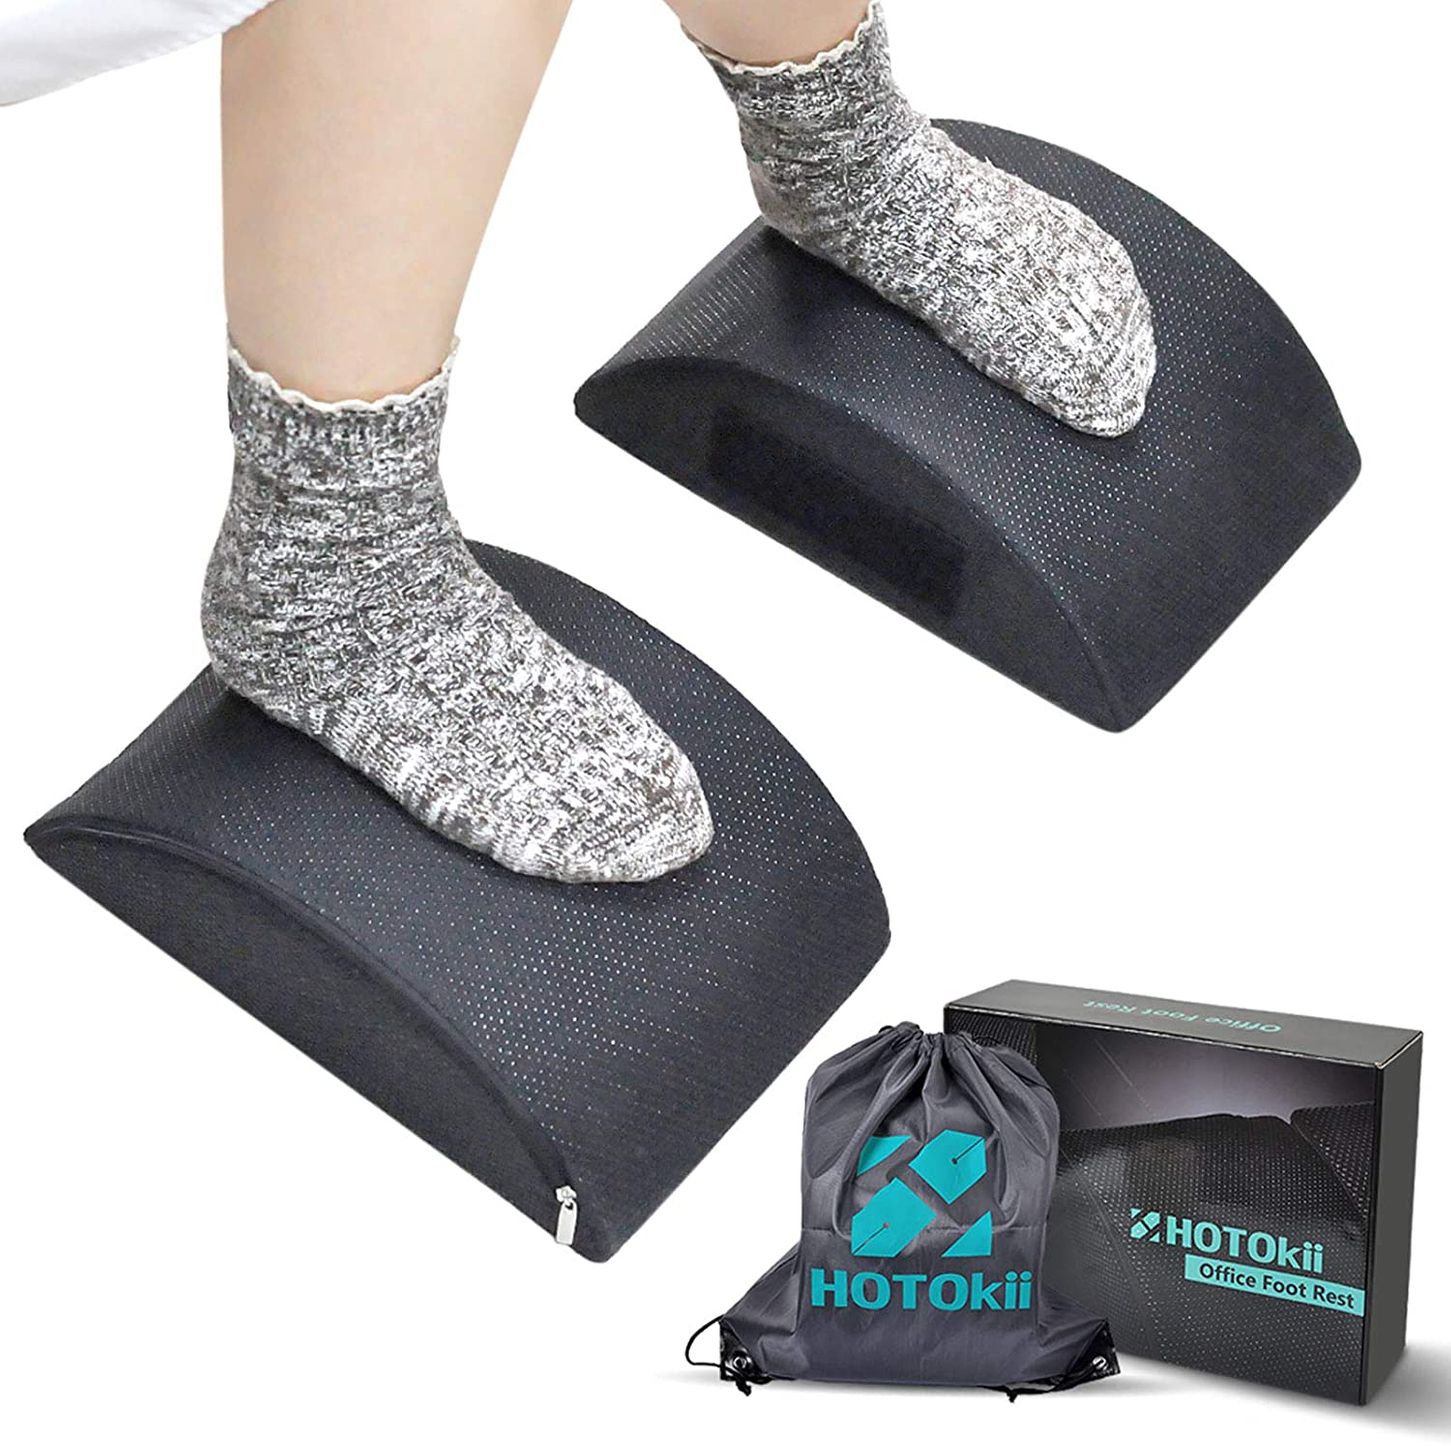  Cozihaven Foot Rest for Under Desk at Work with